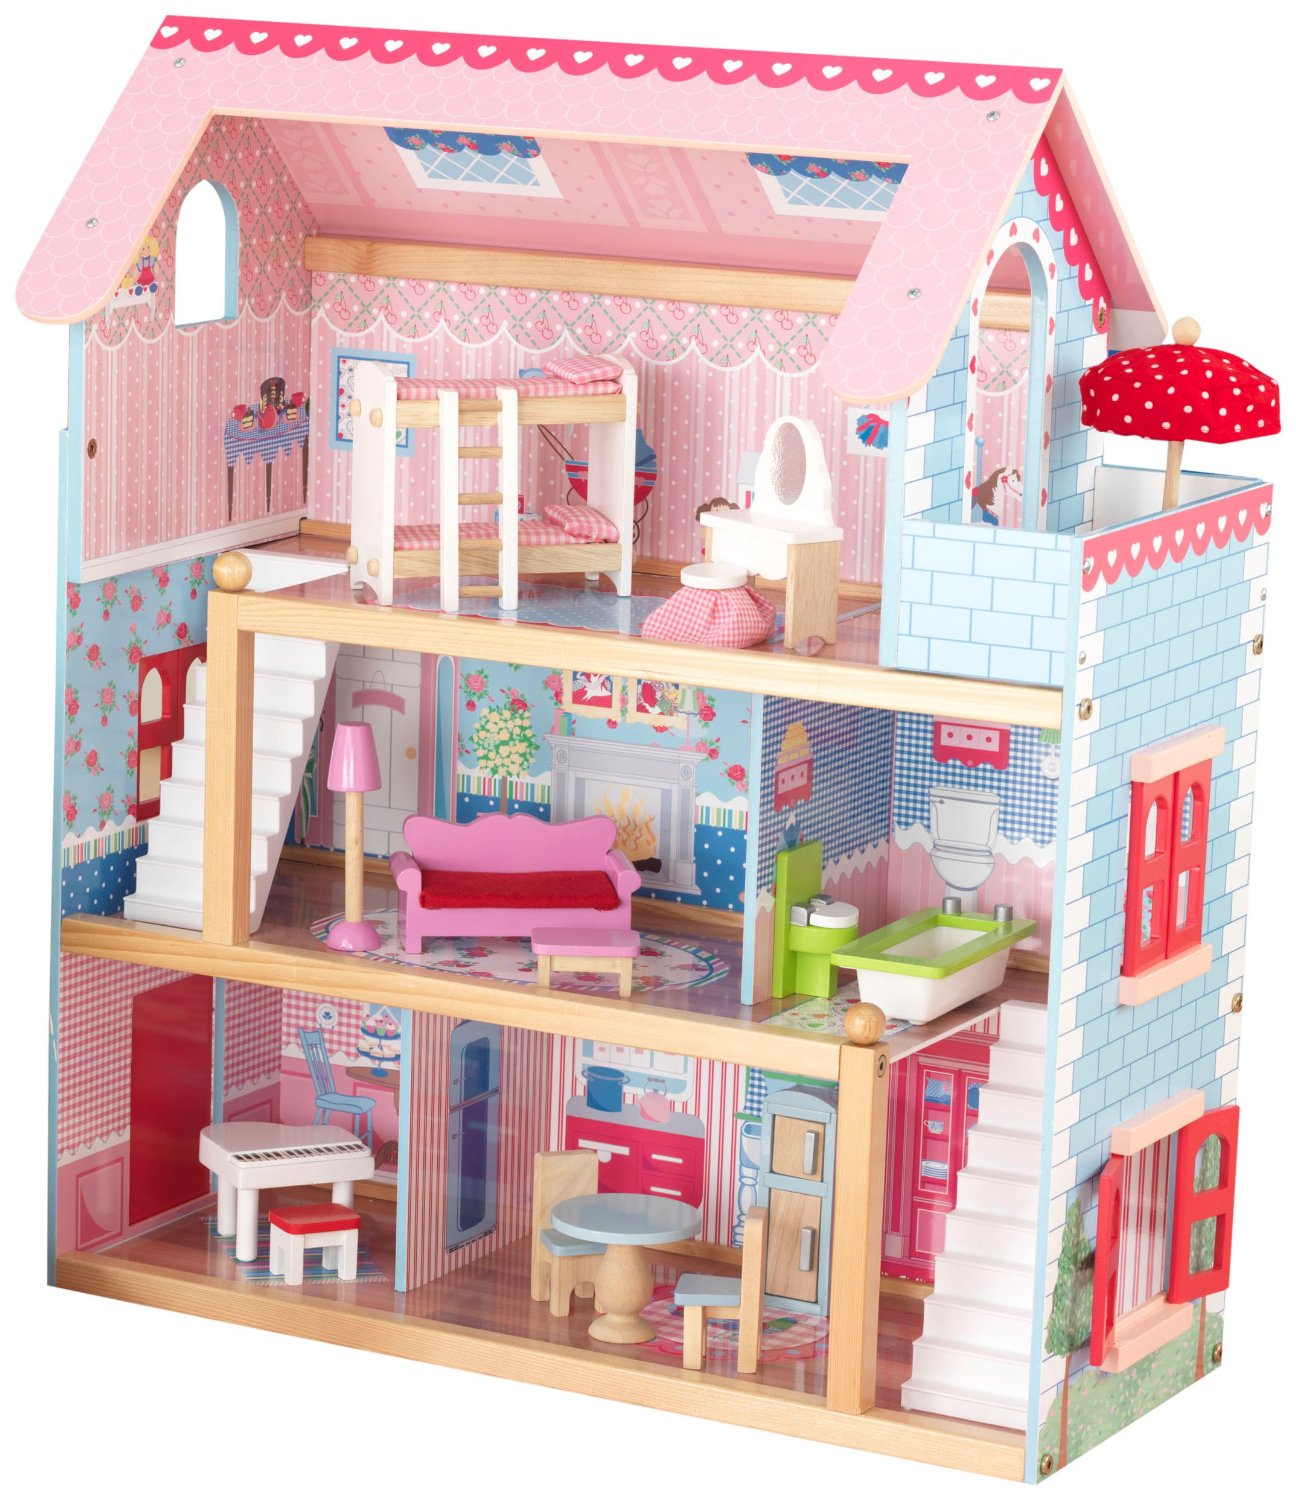  Roll over image to zoom in KidKraft Chelsea Doll Cottage with Furniture